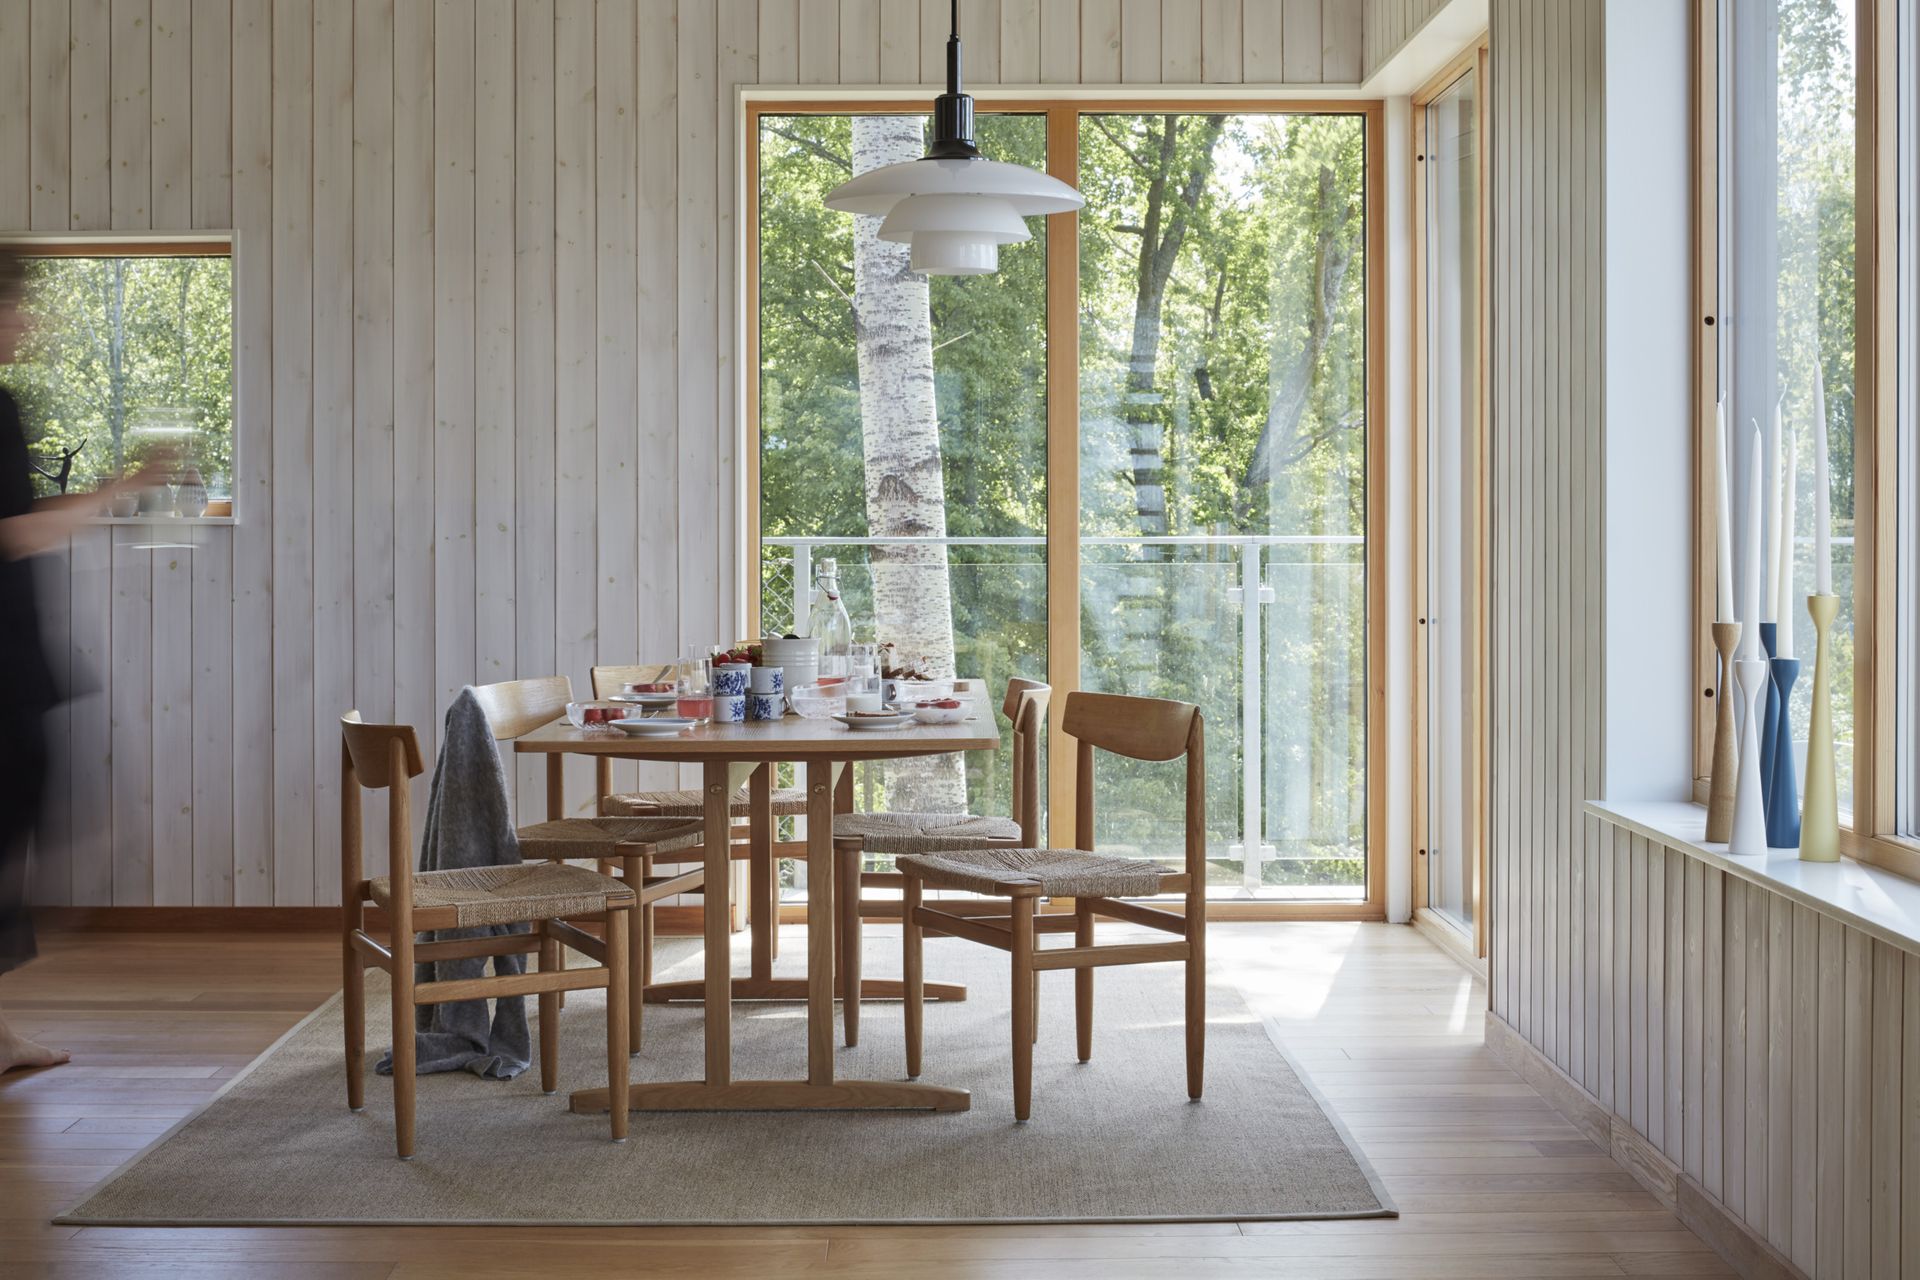 A bright dining room with large windows, with chairs made of wood and reed, and a wooden table where breakfast is served.